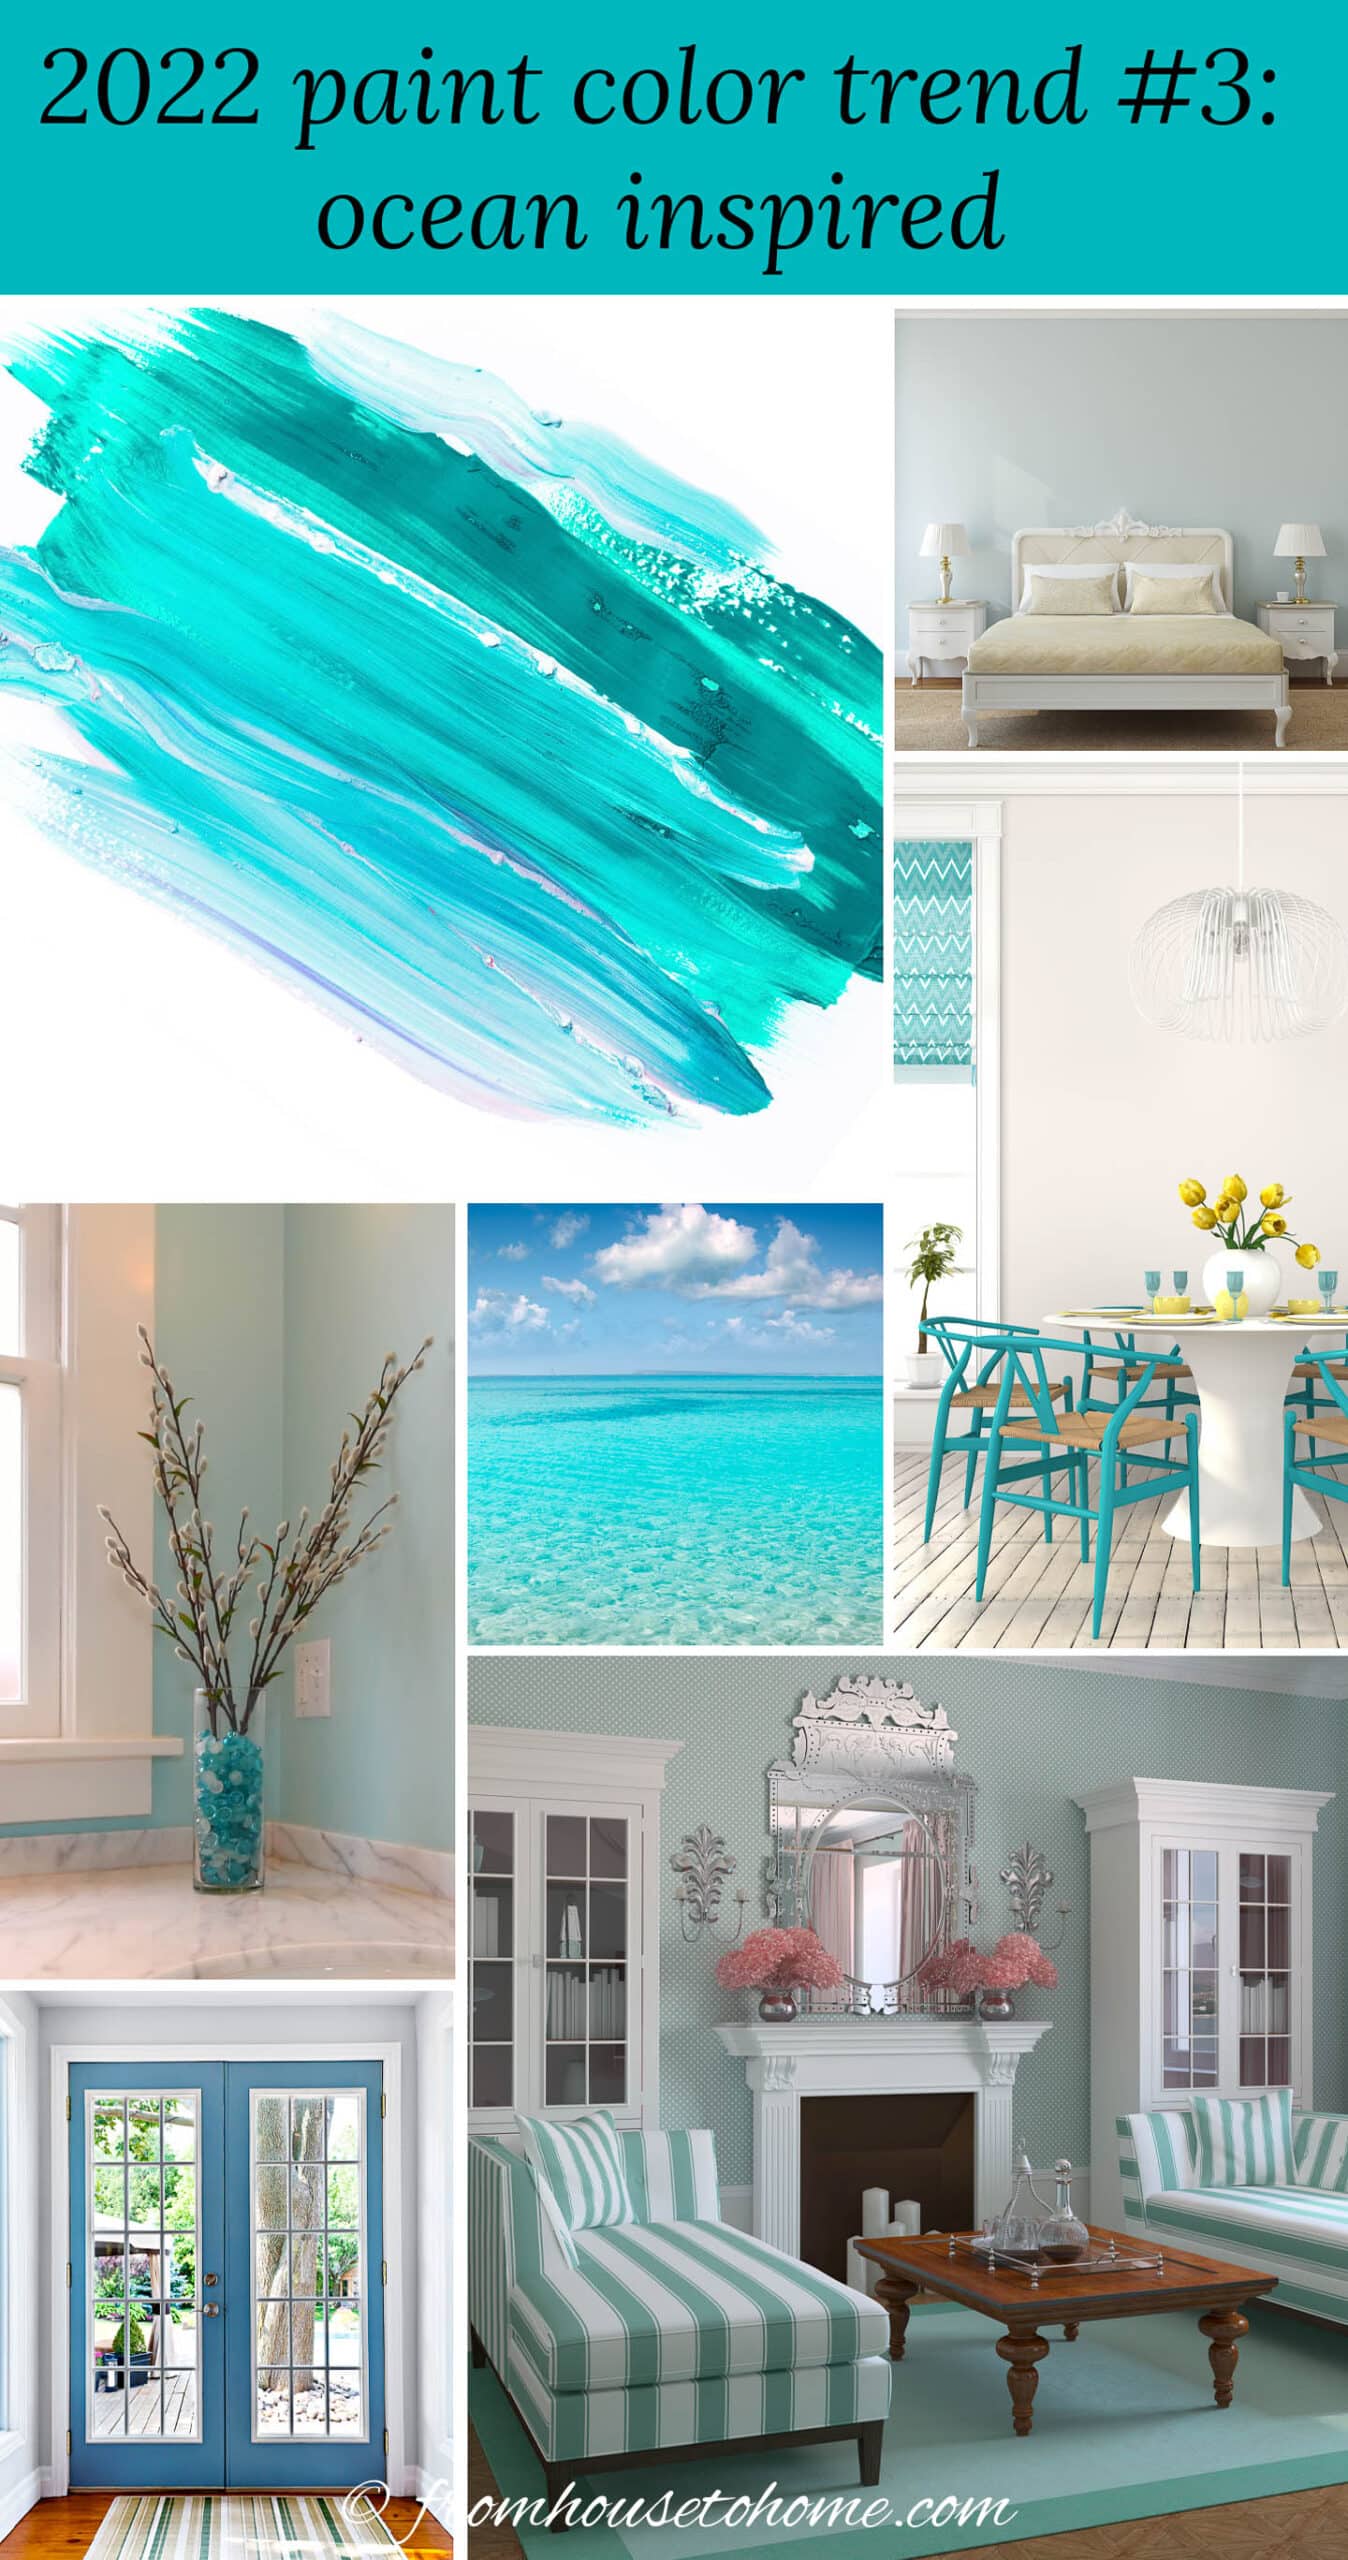 ocean-inspired colors including an aqua paint swatch, a bedroom with light green walls, dining room chairs painted in aqua, the Caribbean ocean, an aqua vase, teal french doors, and a sitting room painted in sea glass green